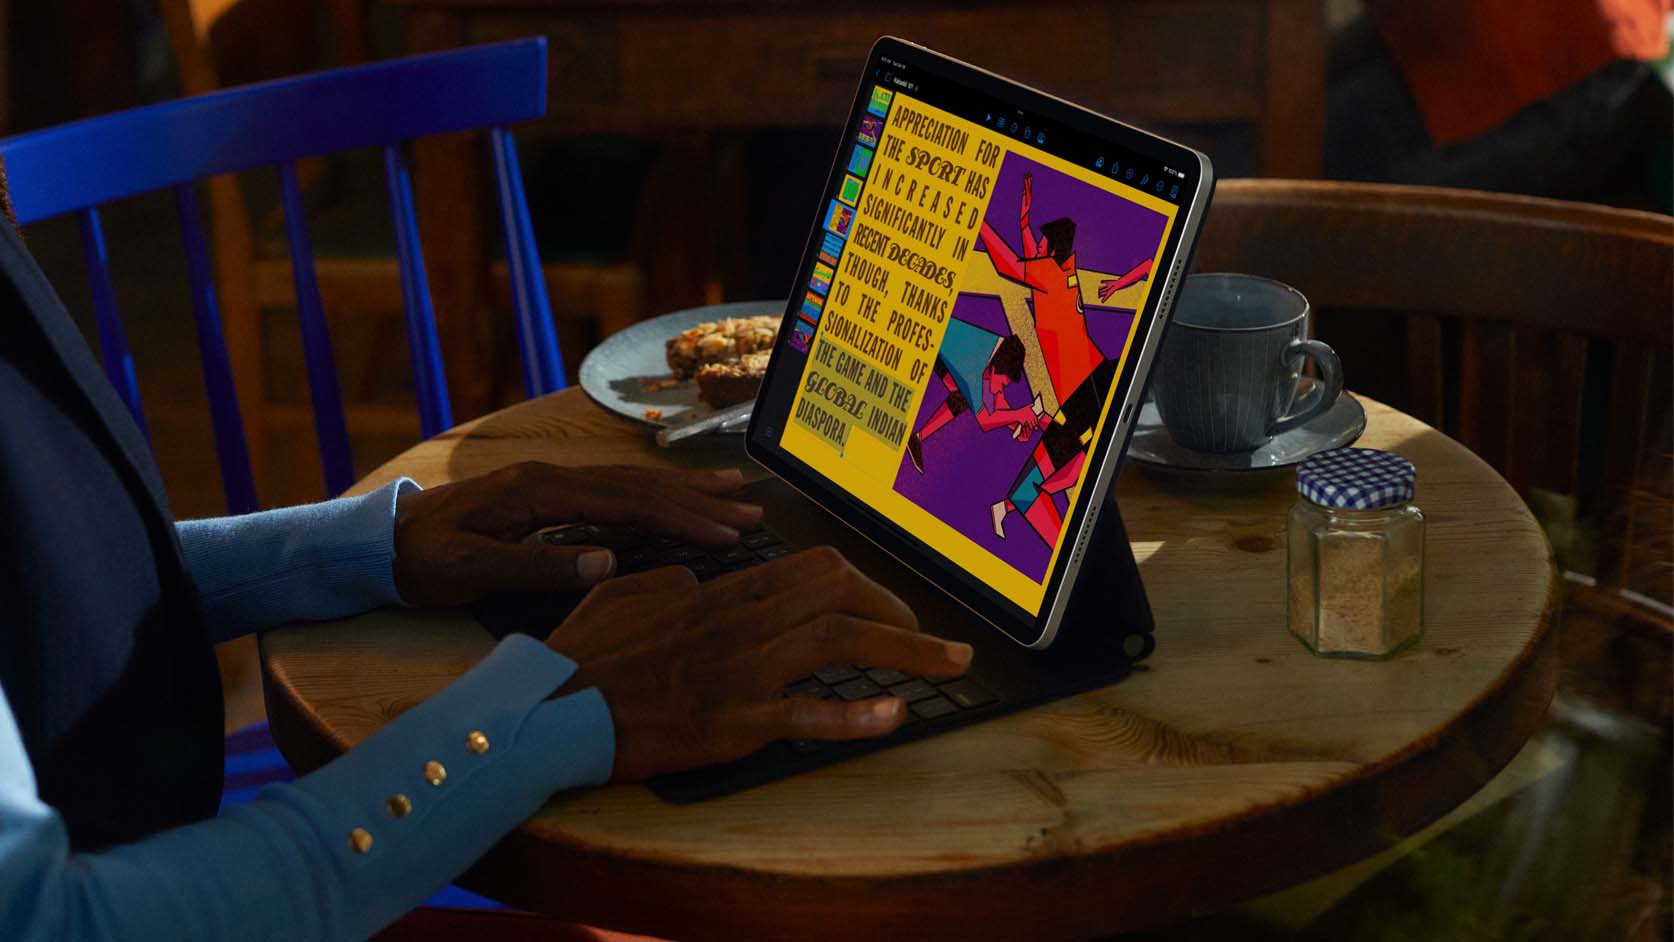 Person using an ipad on a table